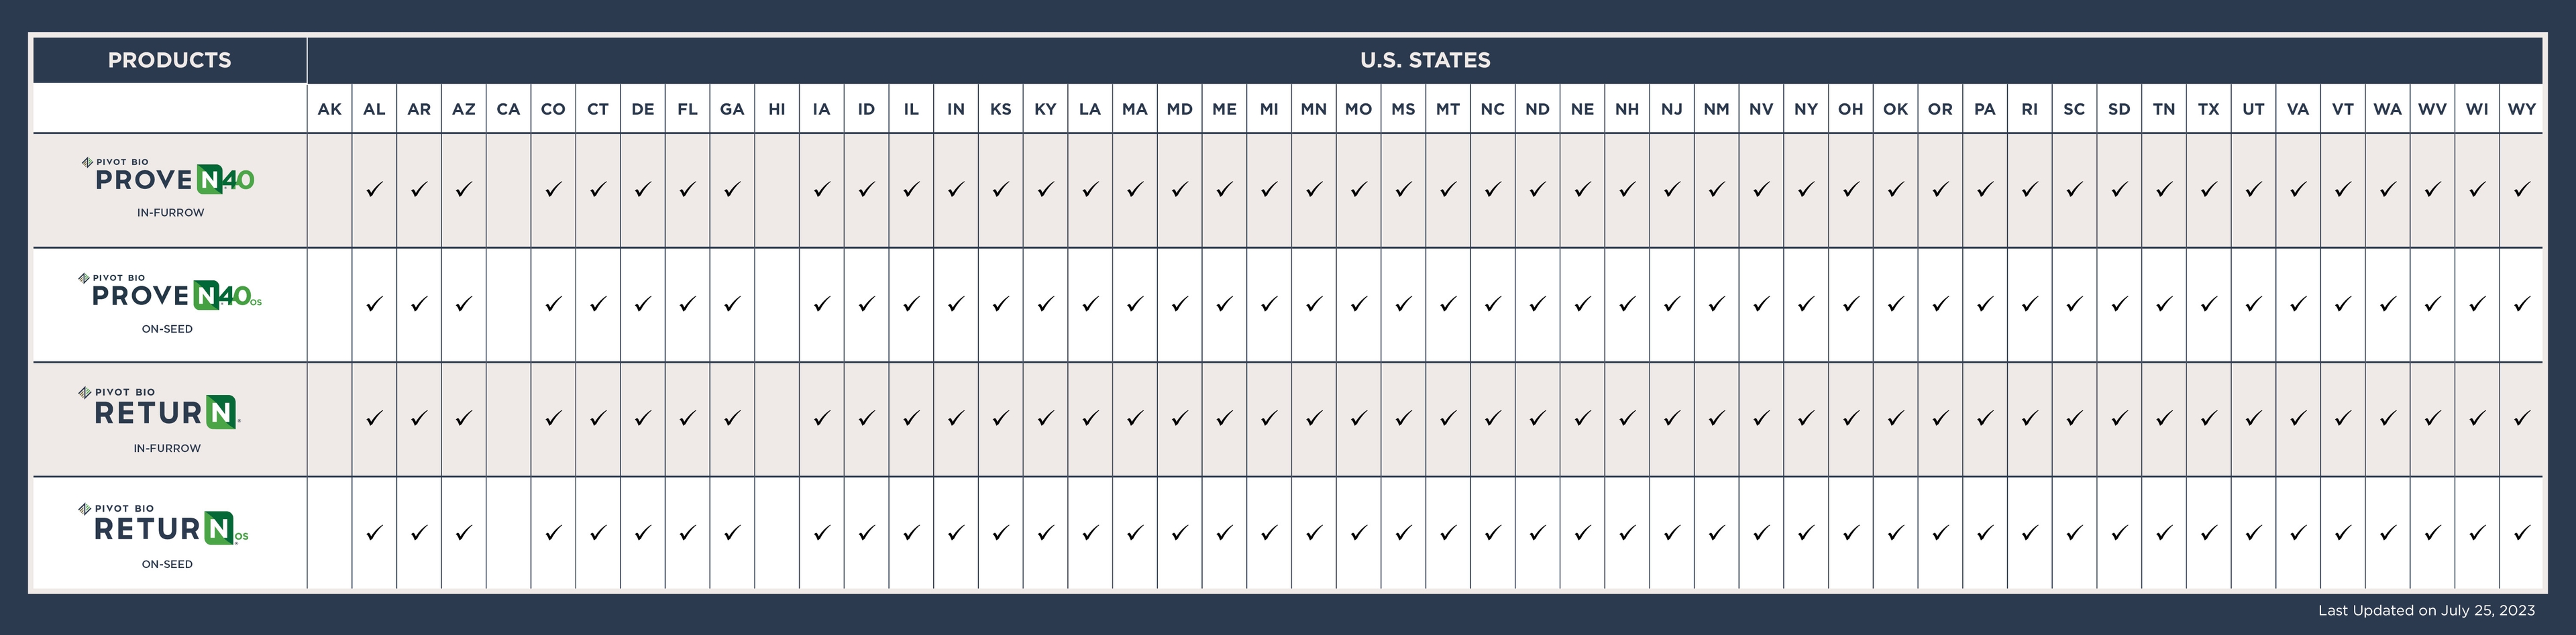 Table that indicates approval to sell or registration status of Pivot Bio products in the United States.